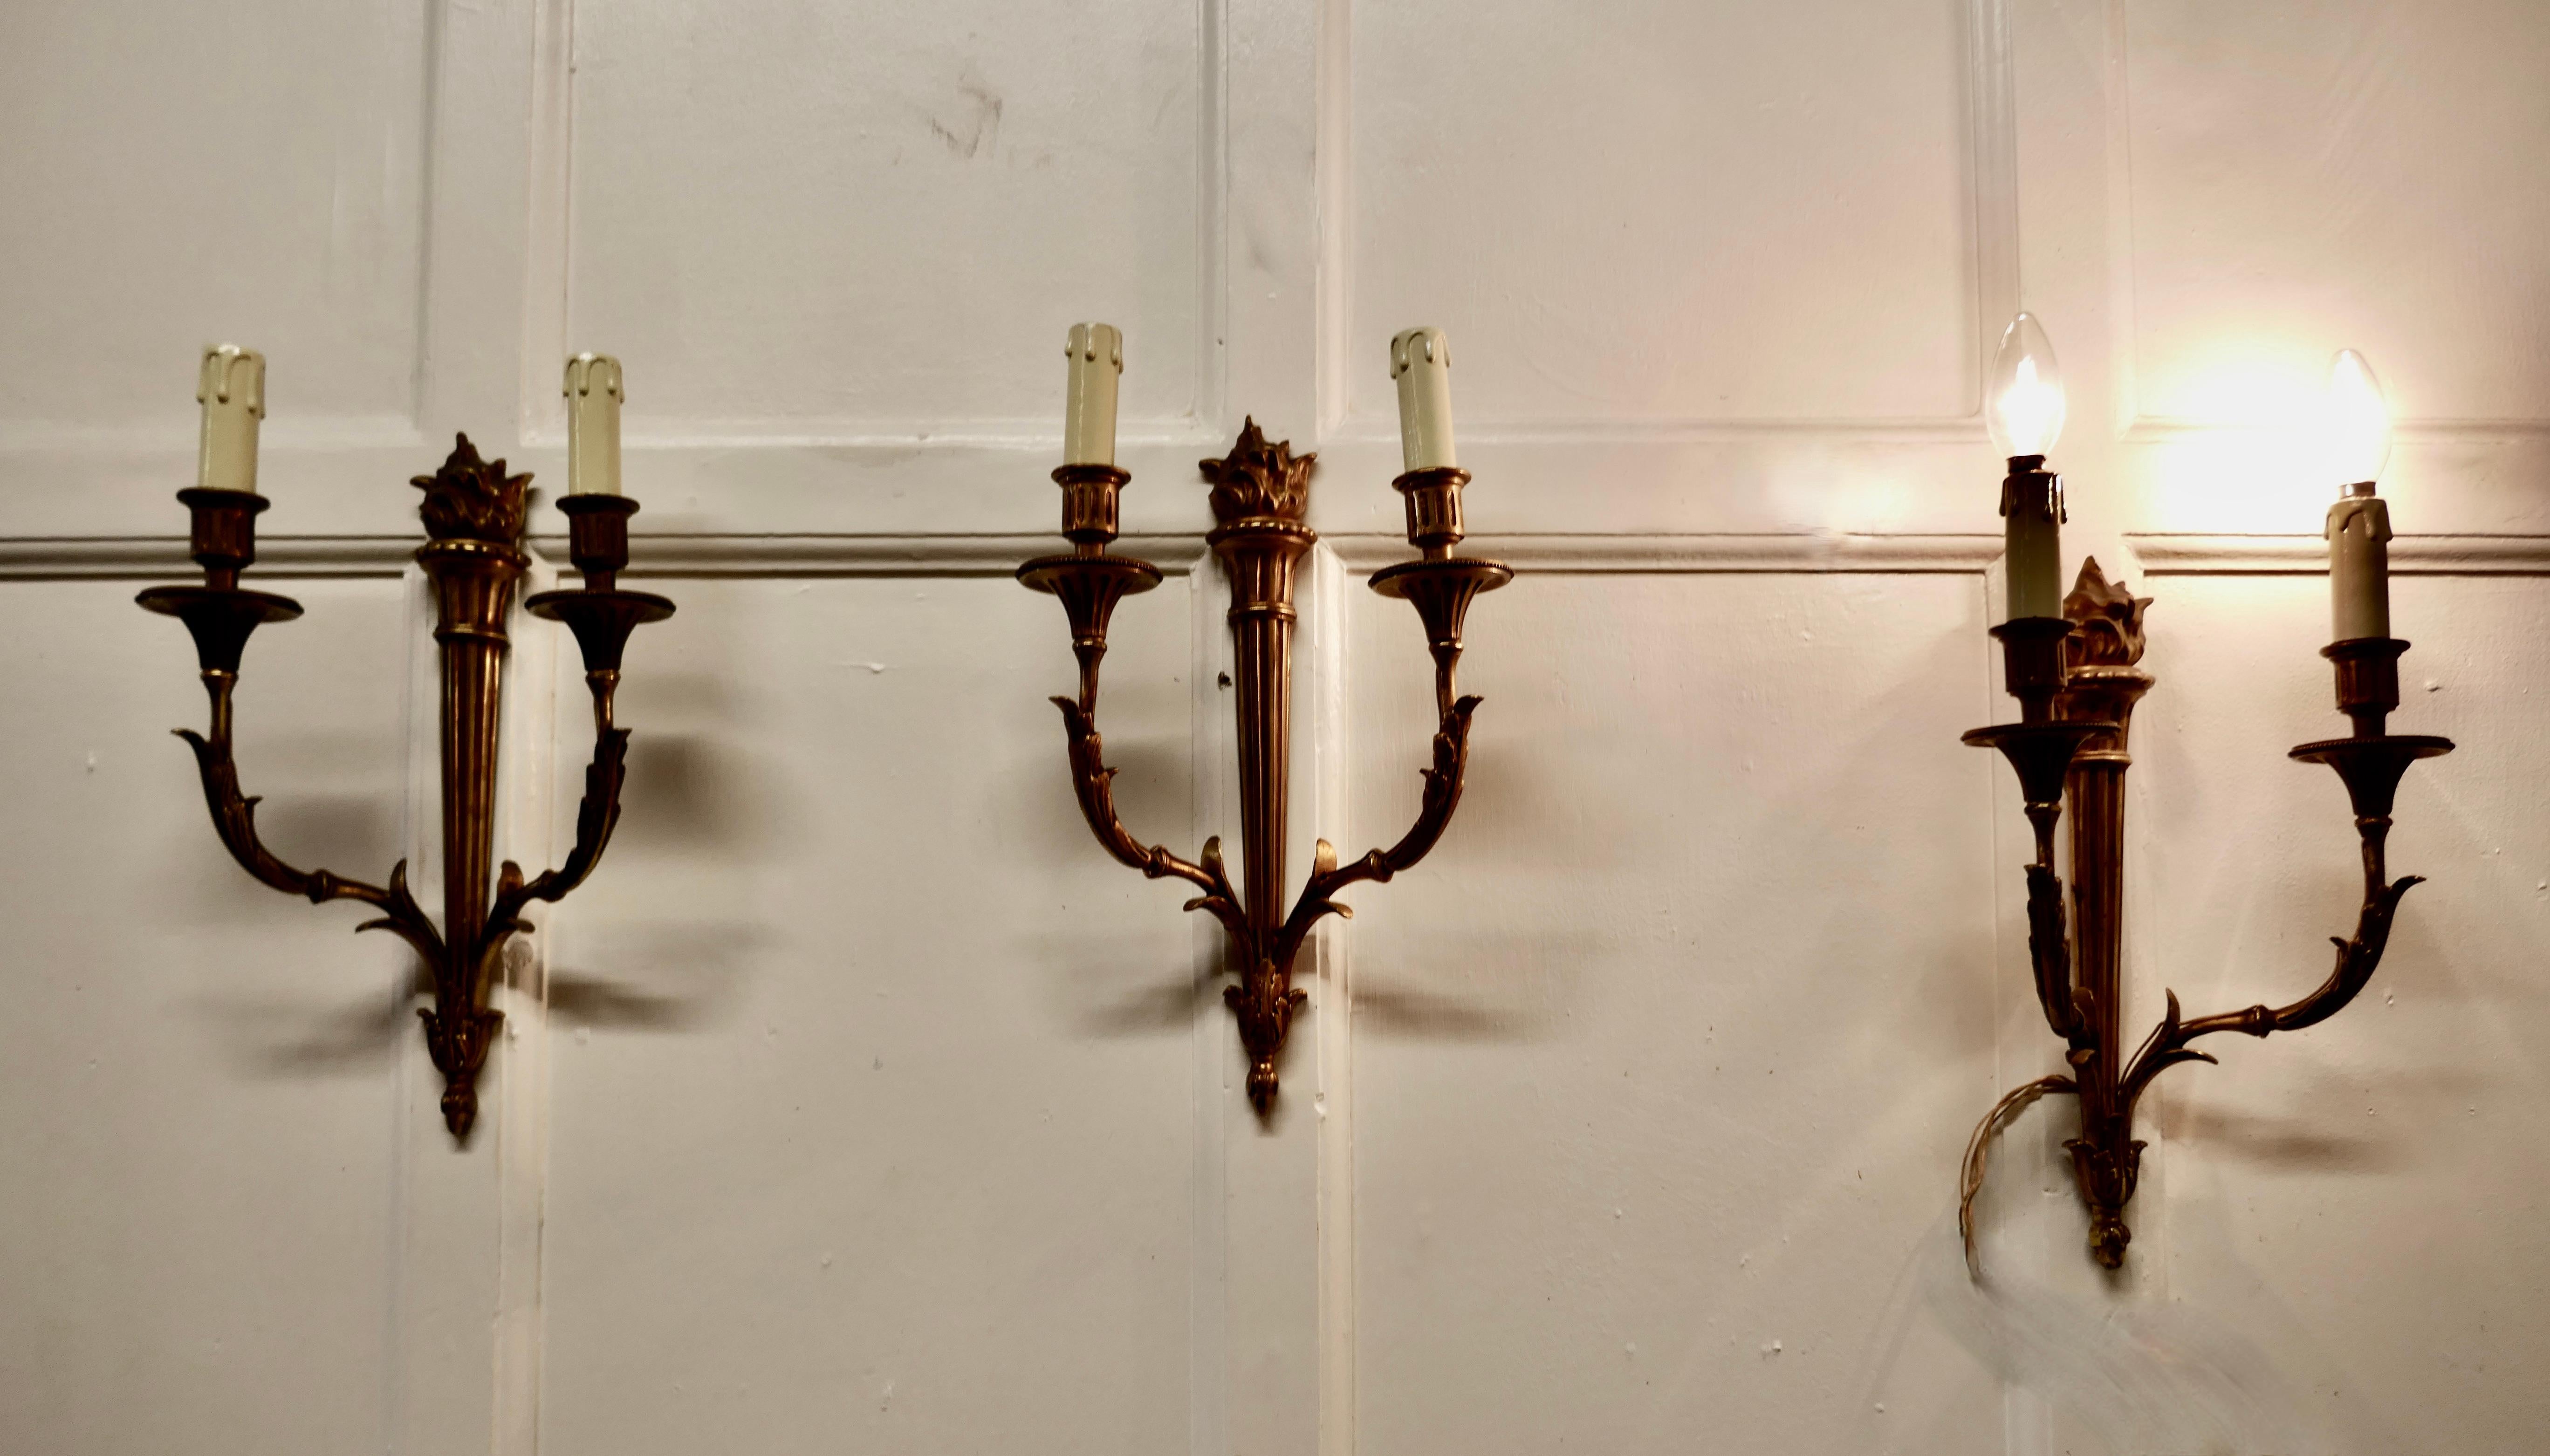 Set of 3 French neo classical large brass twin wall lights


A very handsome set of 3 large heavy brass wall lights, the lights are in the classical style of a Lighted torch with acanthus leaf branches 
Each light has 2 branches each with a